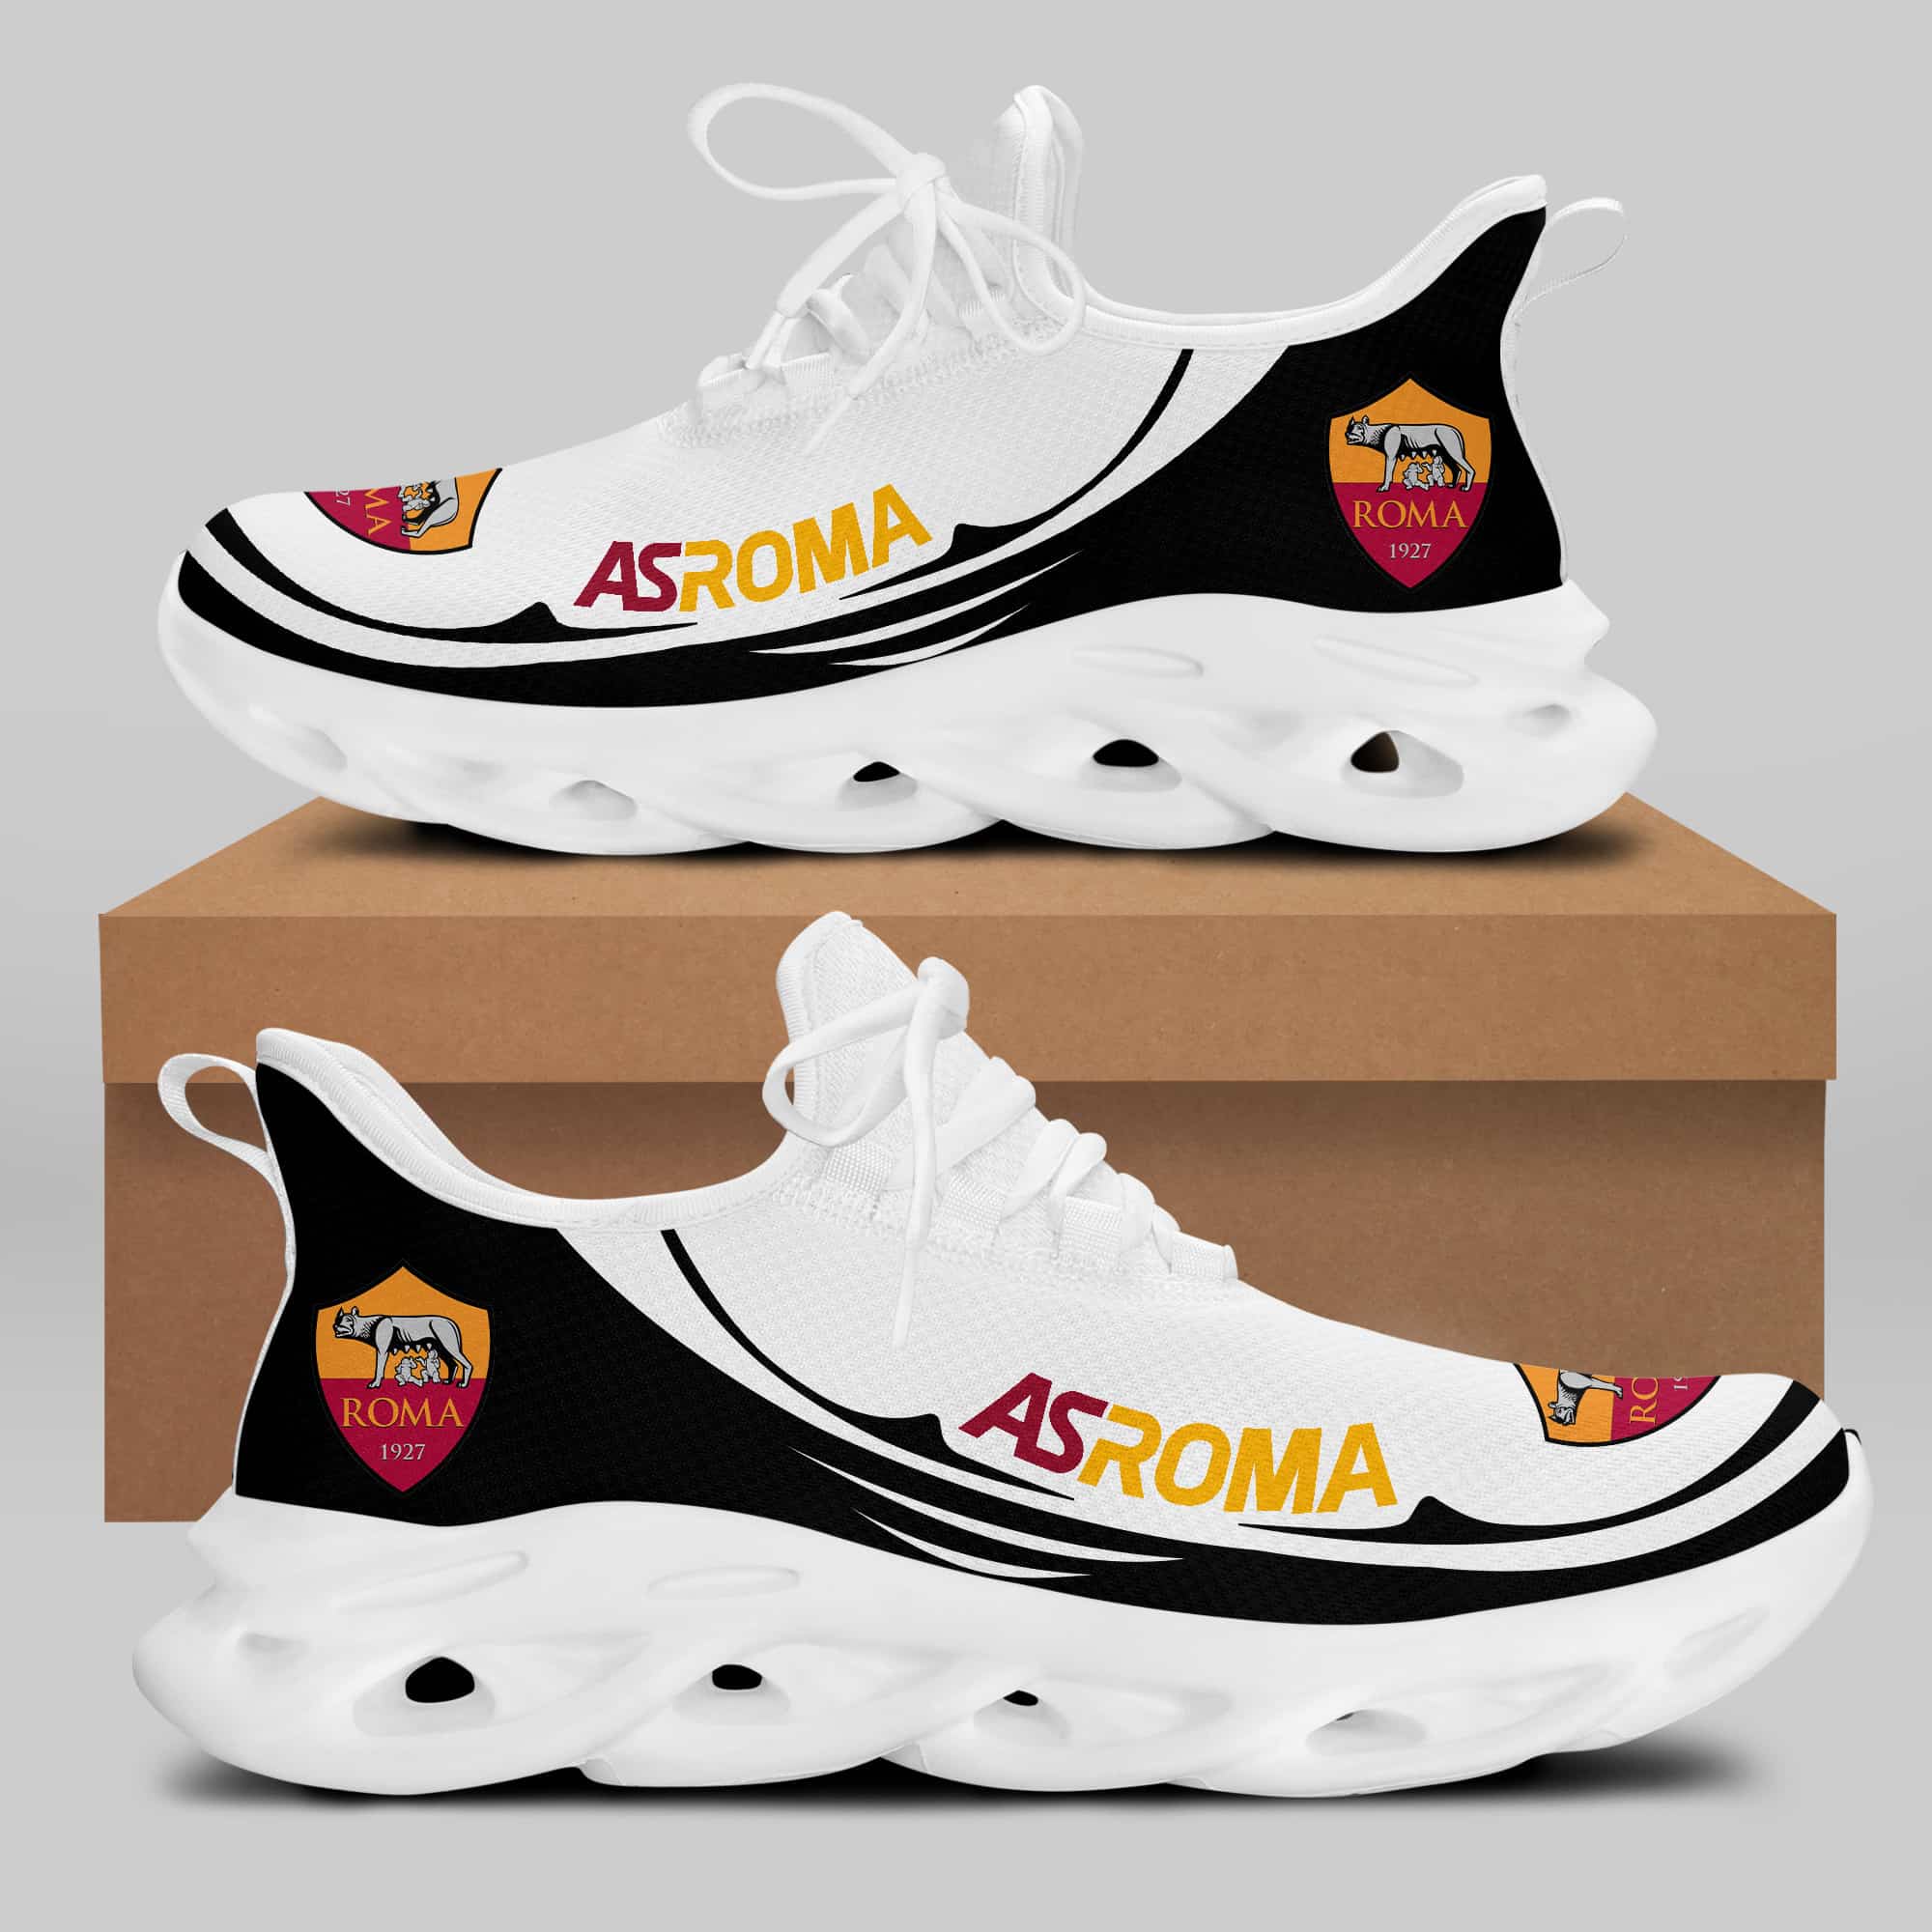 As Roma Running Shoes Max Soul Shoes Sneakers Ver 31 1